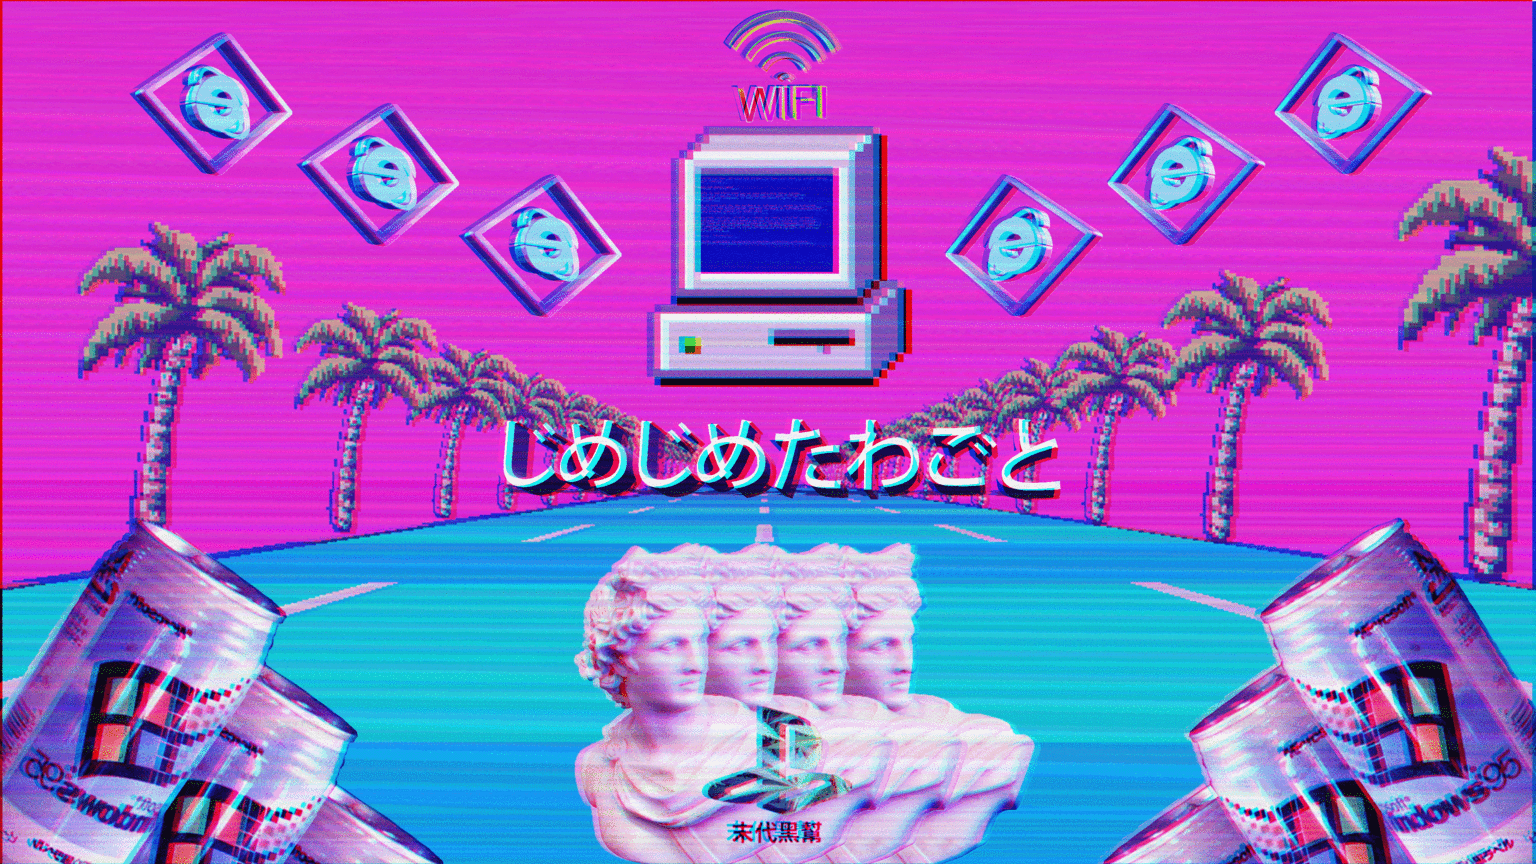 Aesthetic Vaporwave wallpaper with palm trees, a computer, and a statue - Windows 95